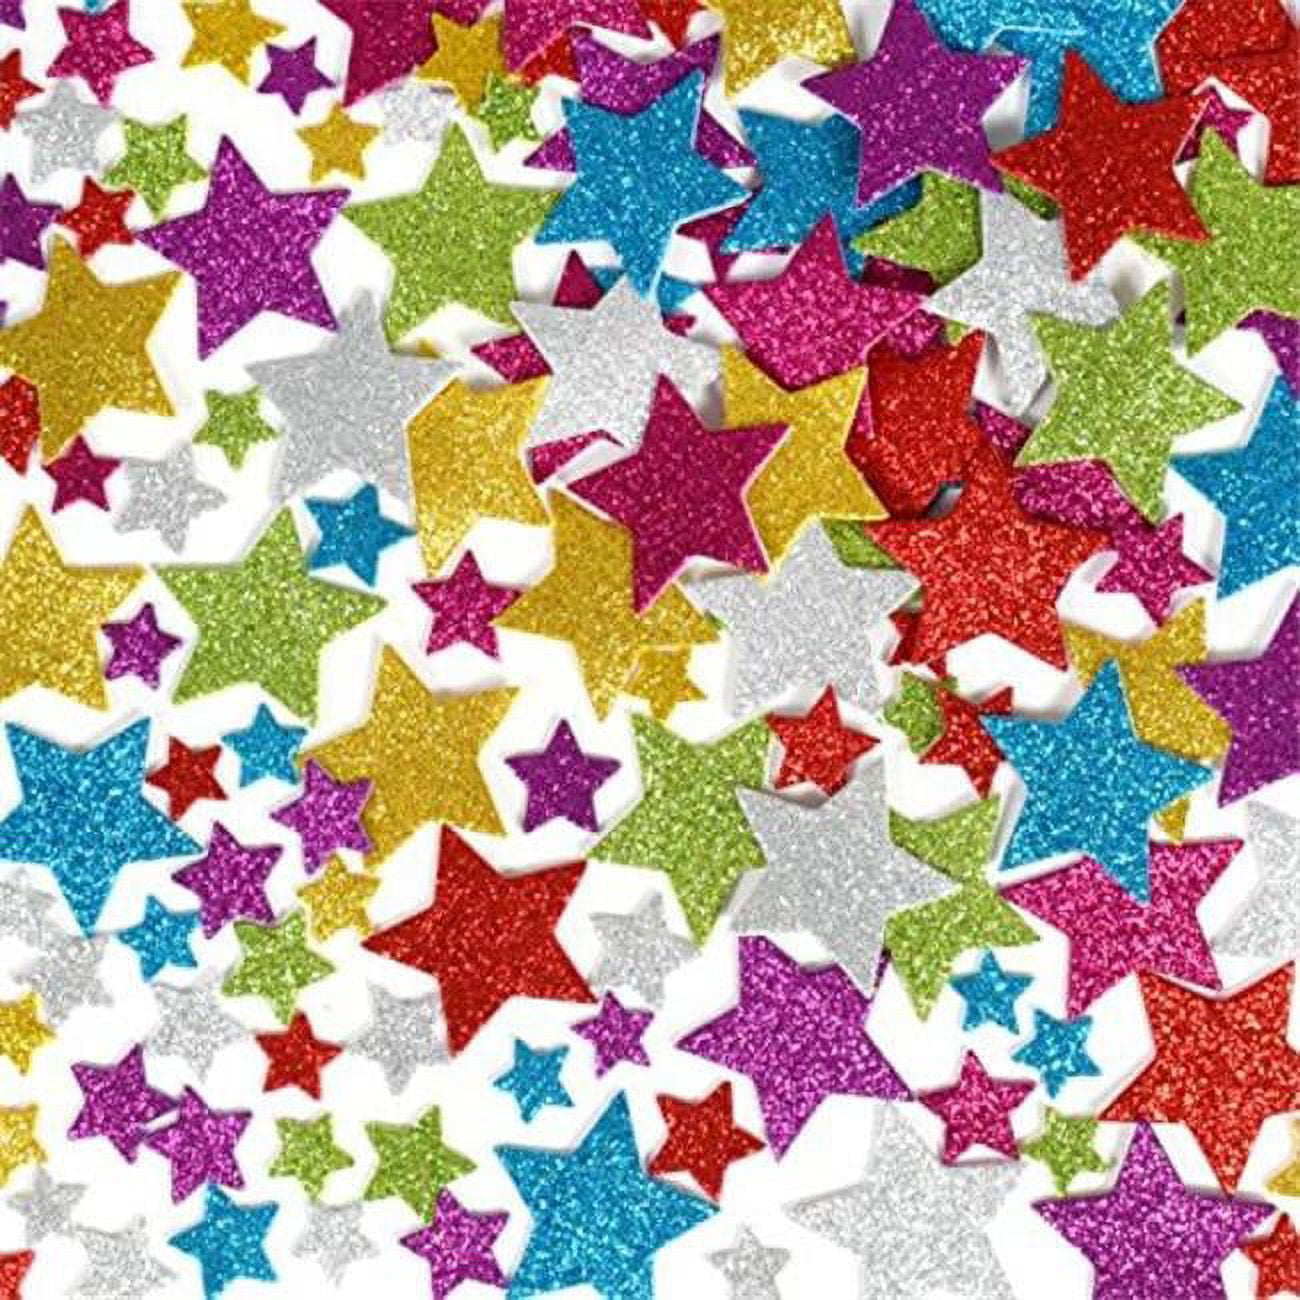 Frcolor Stickers Star Glitter Supplies Kids Reward Sparkle Shiny Mini Bling  Colored Adhesive Self Little Face Red Foil Small 